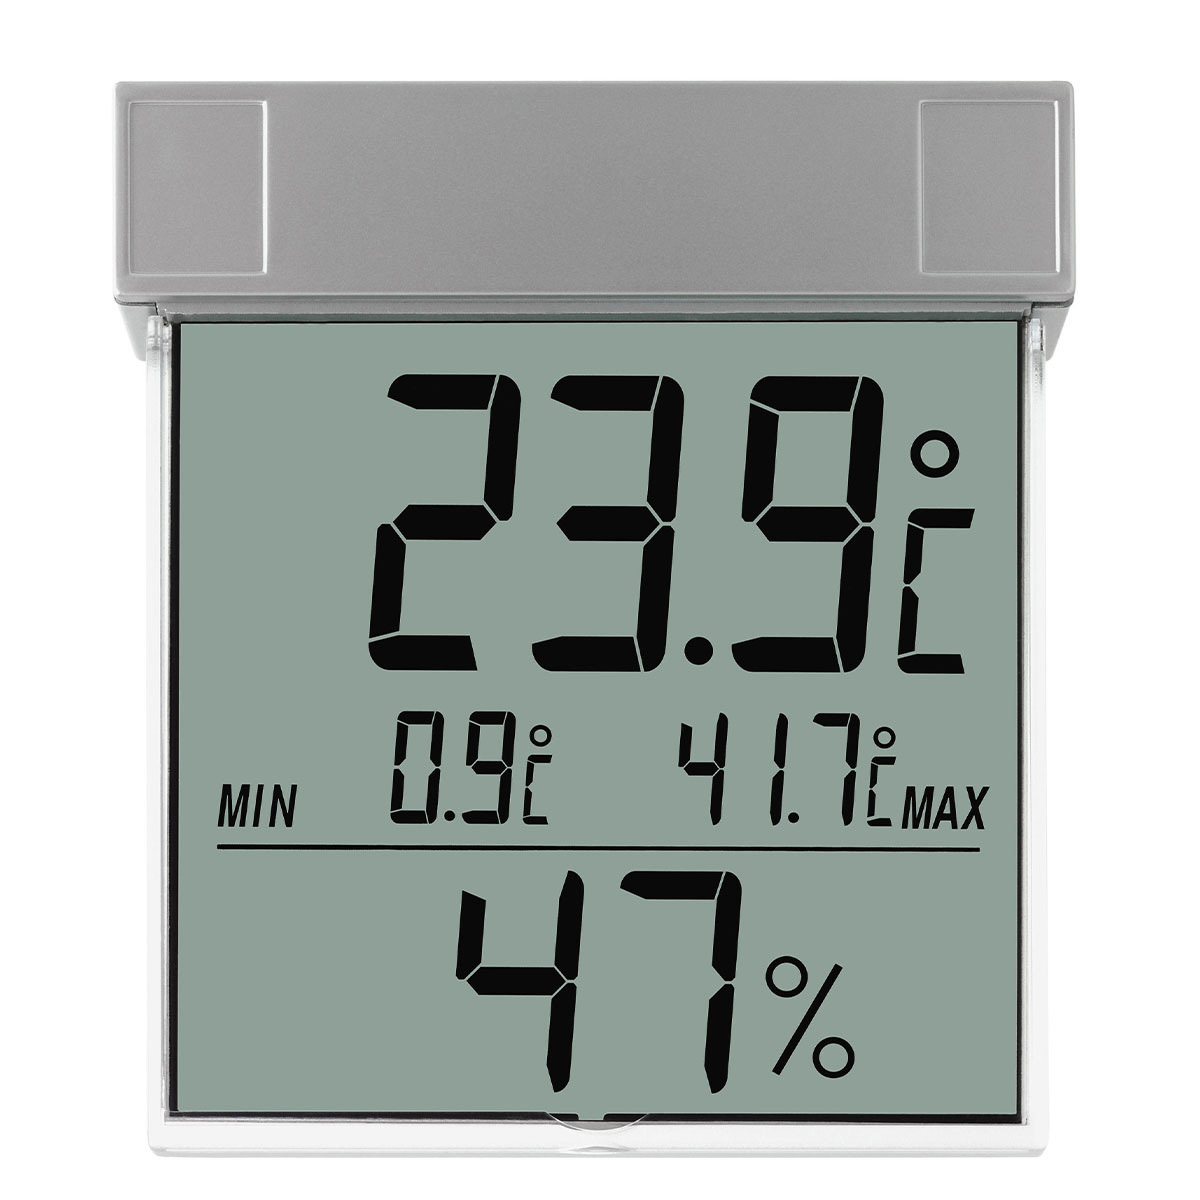 Digitales Fenster-Thermo-Hygrometer VISION